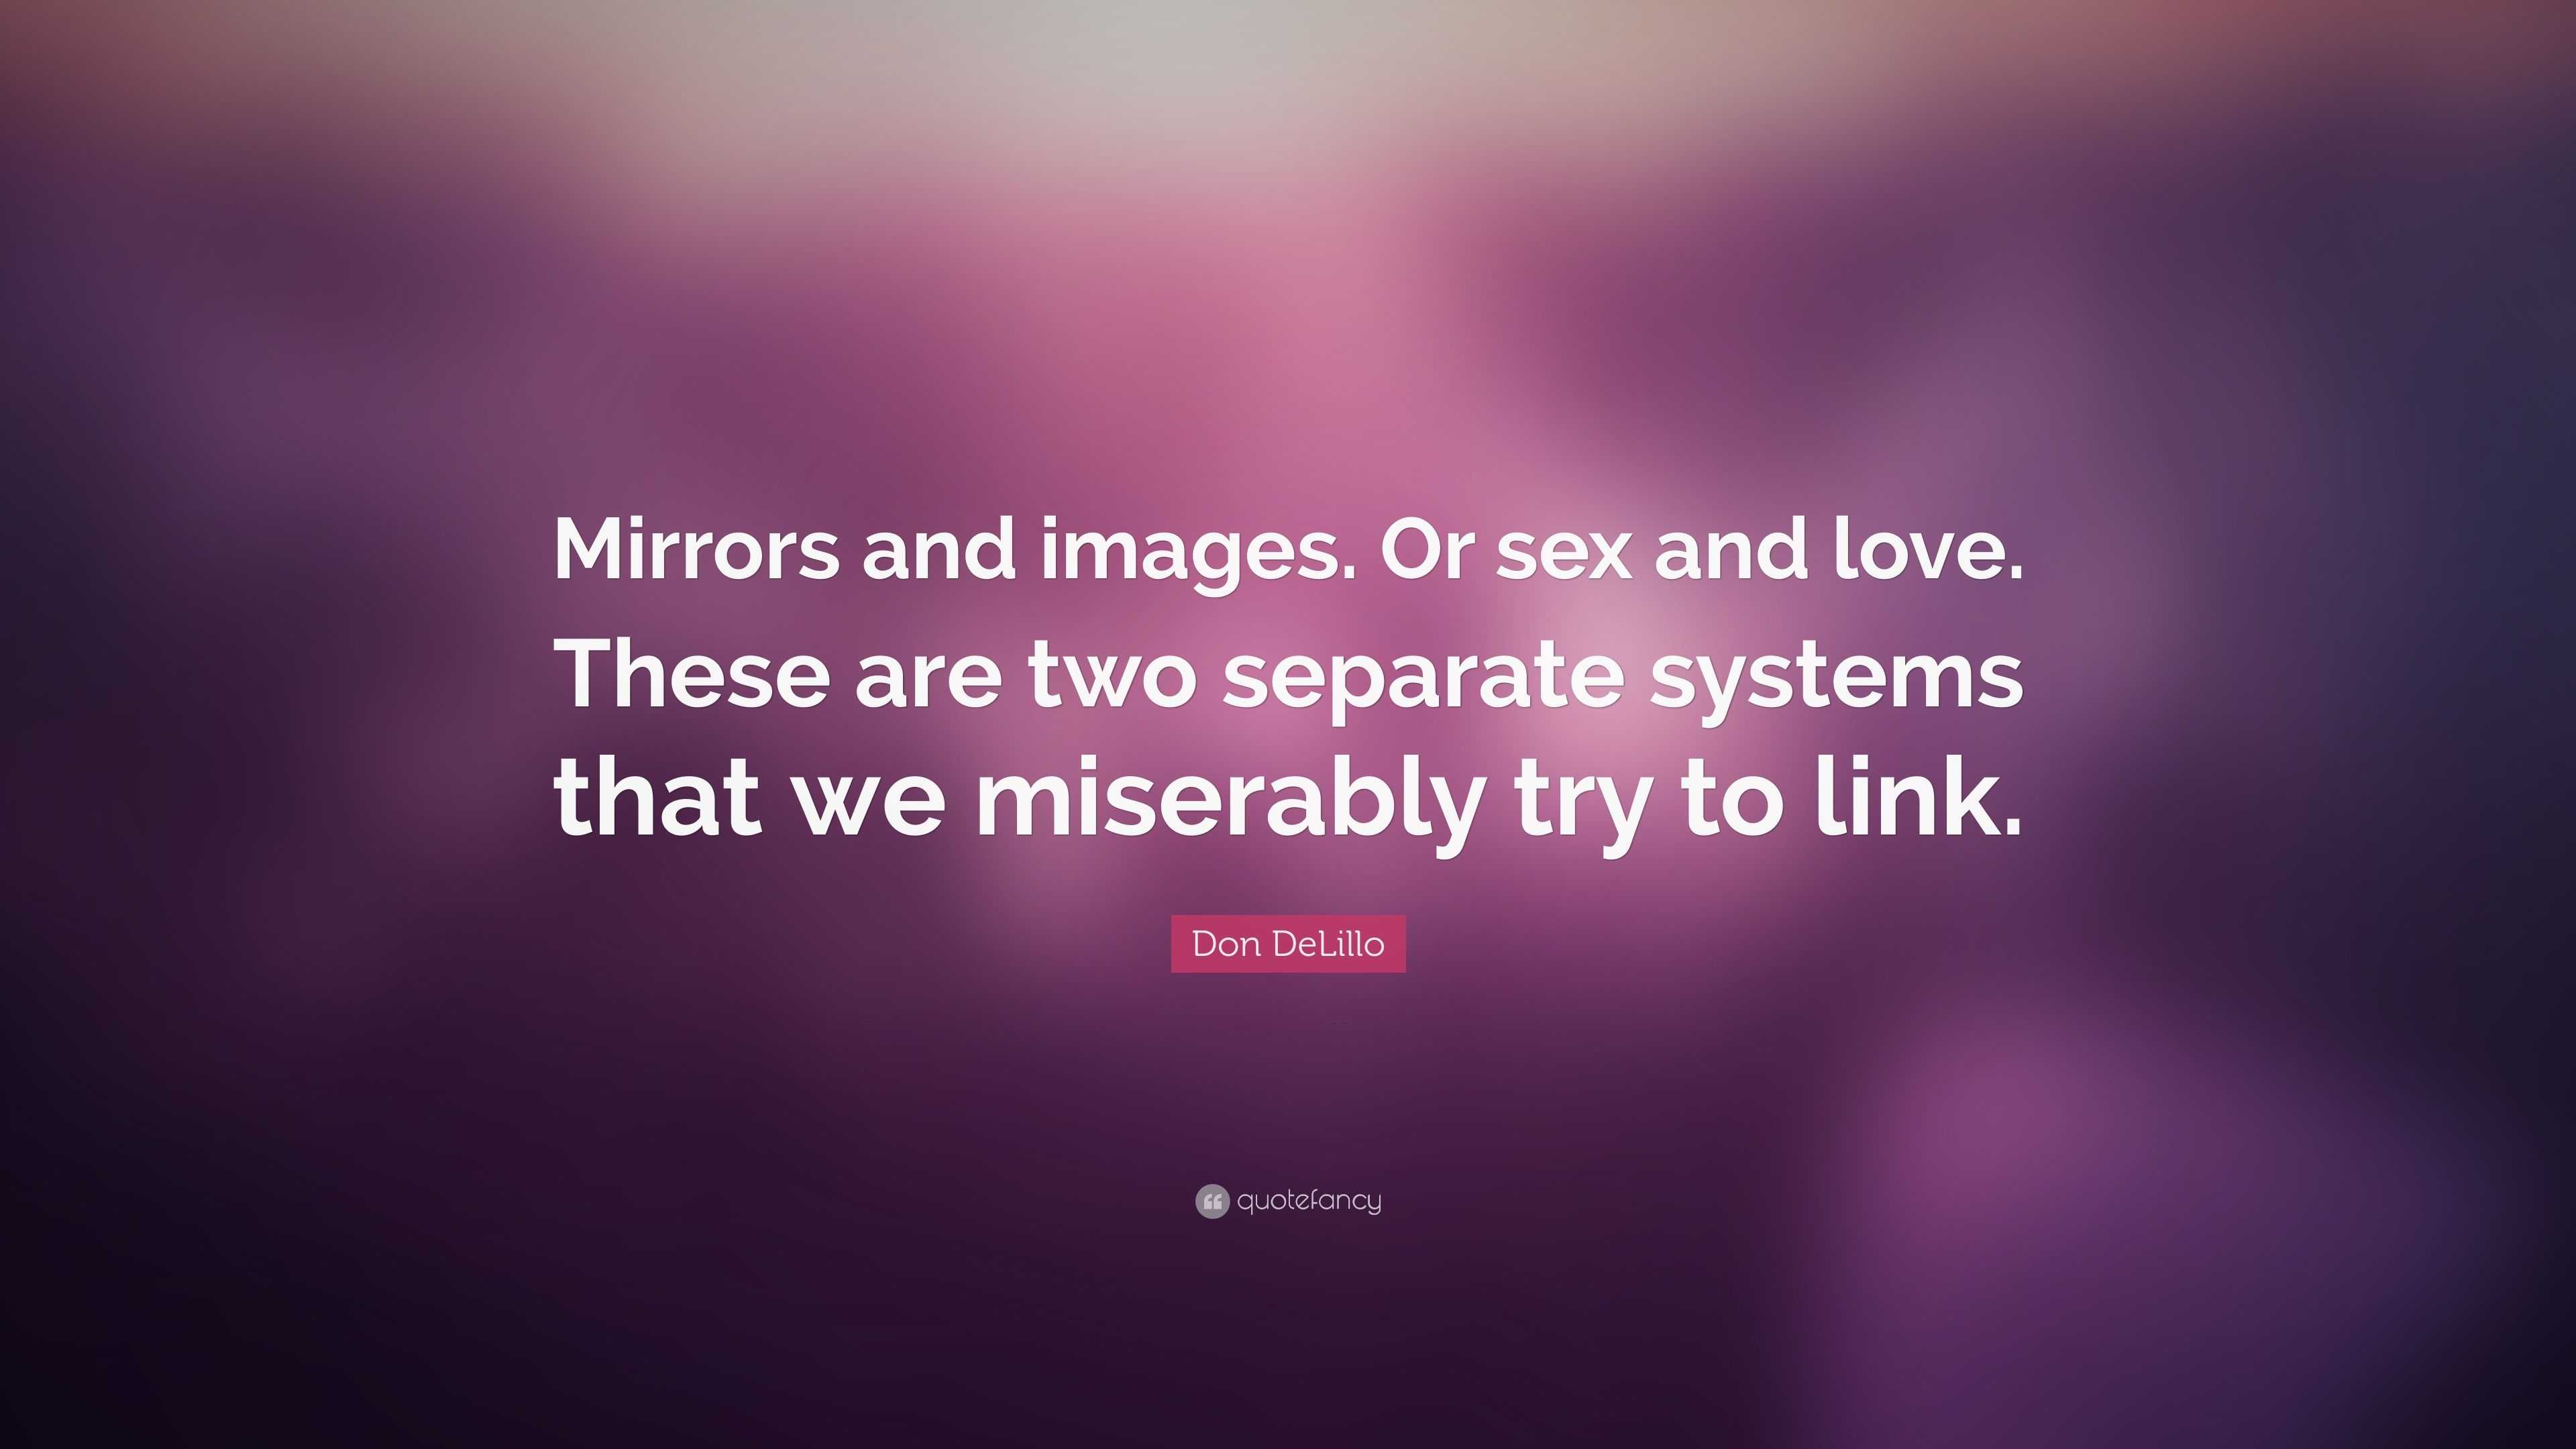 Don Delillo Quote “mirrors And Images Or Sex And Love These Are Two Separate Systems That We 9703